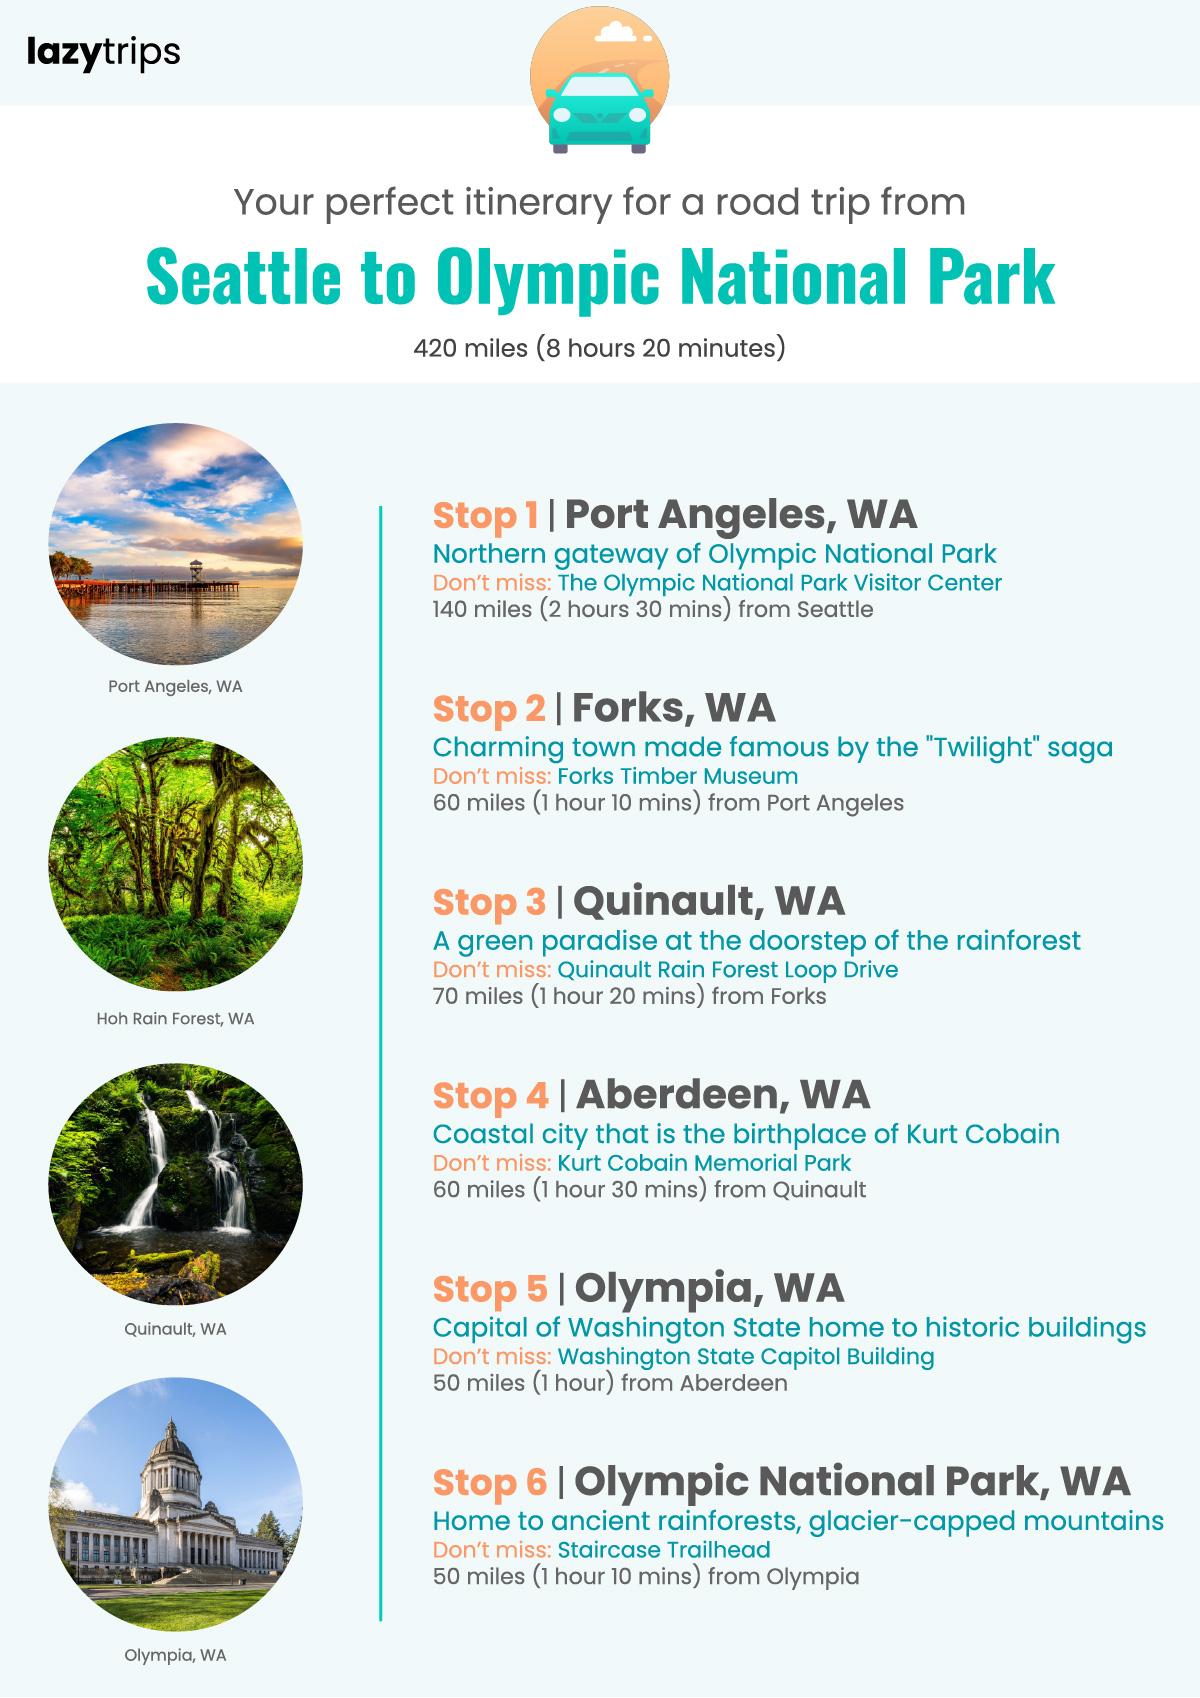 Itinerary for a road trip from Seattle to Olympic National Park, stopping in Port Angeles, Forks, Quinault, Aberdeen, Olympia and Olympic National Forest